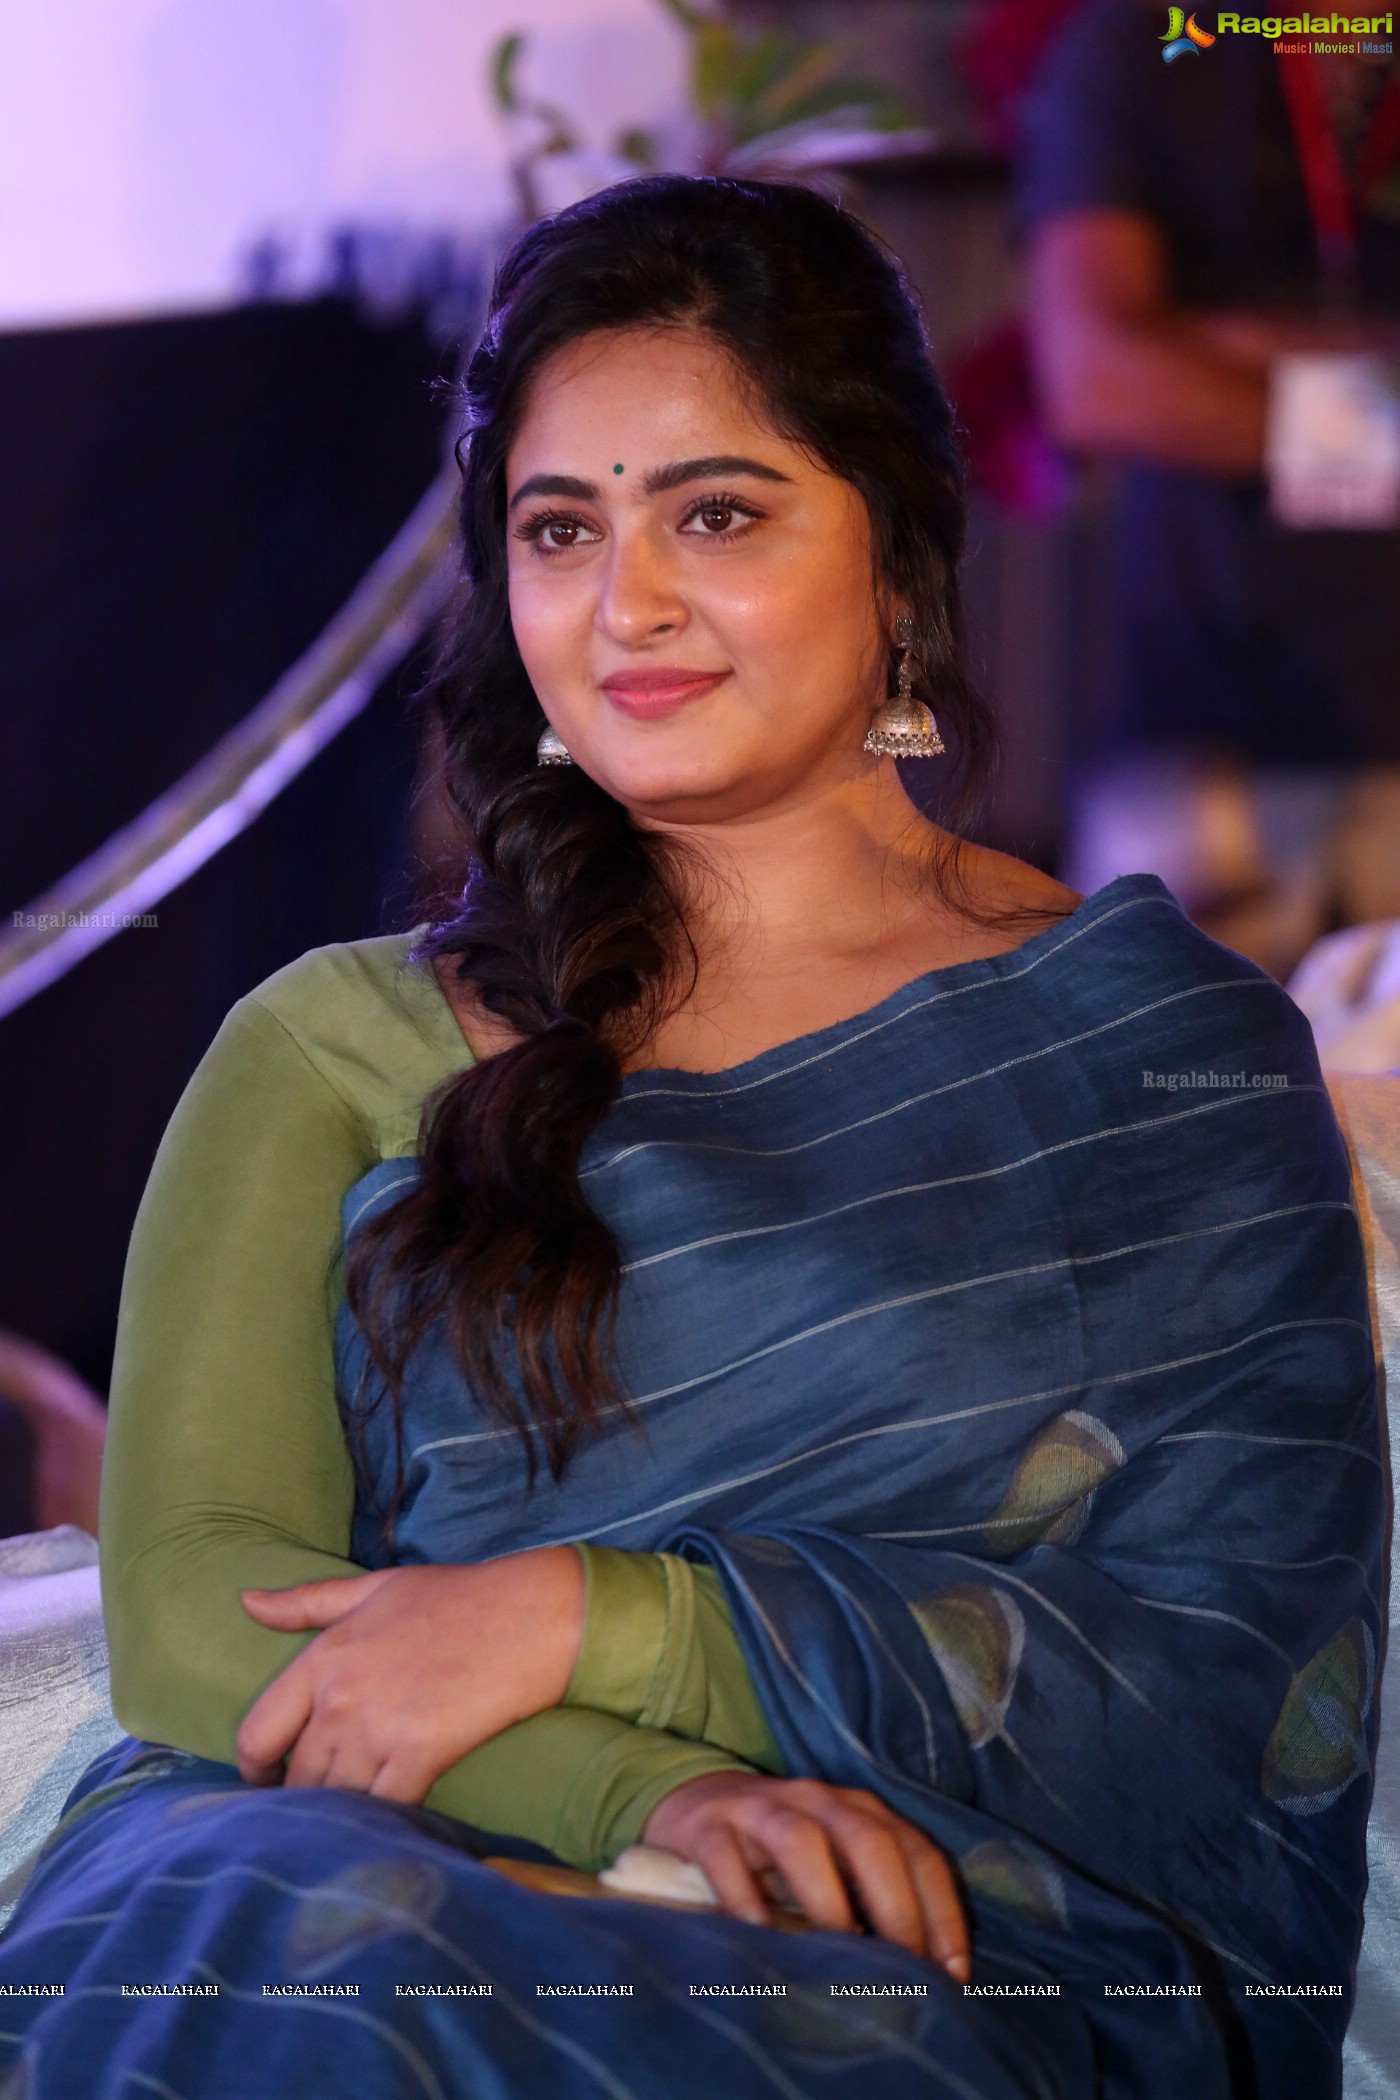 Anushka Shetty at Awe! Pre-Release Event (Posters)